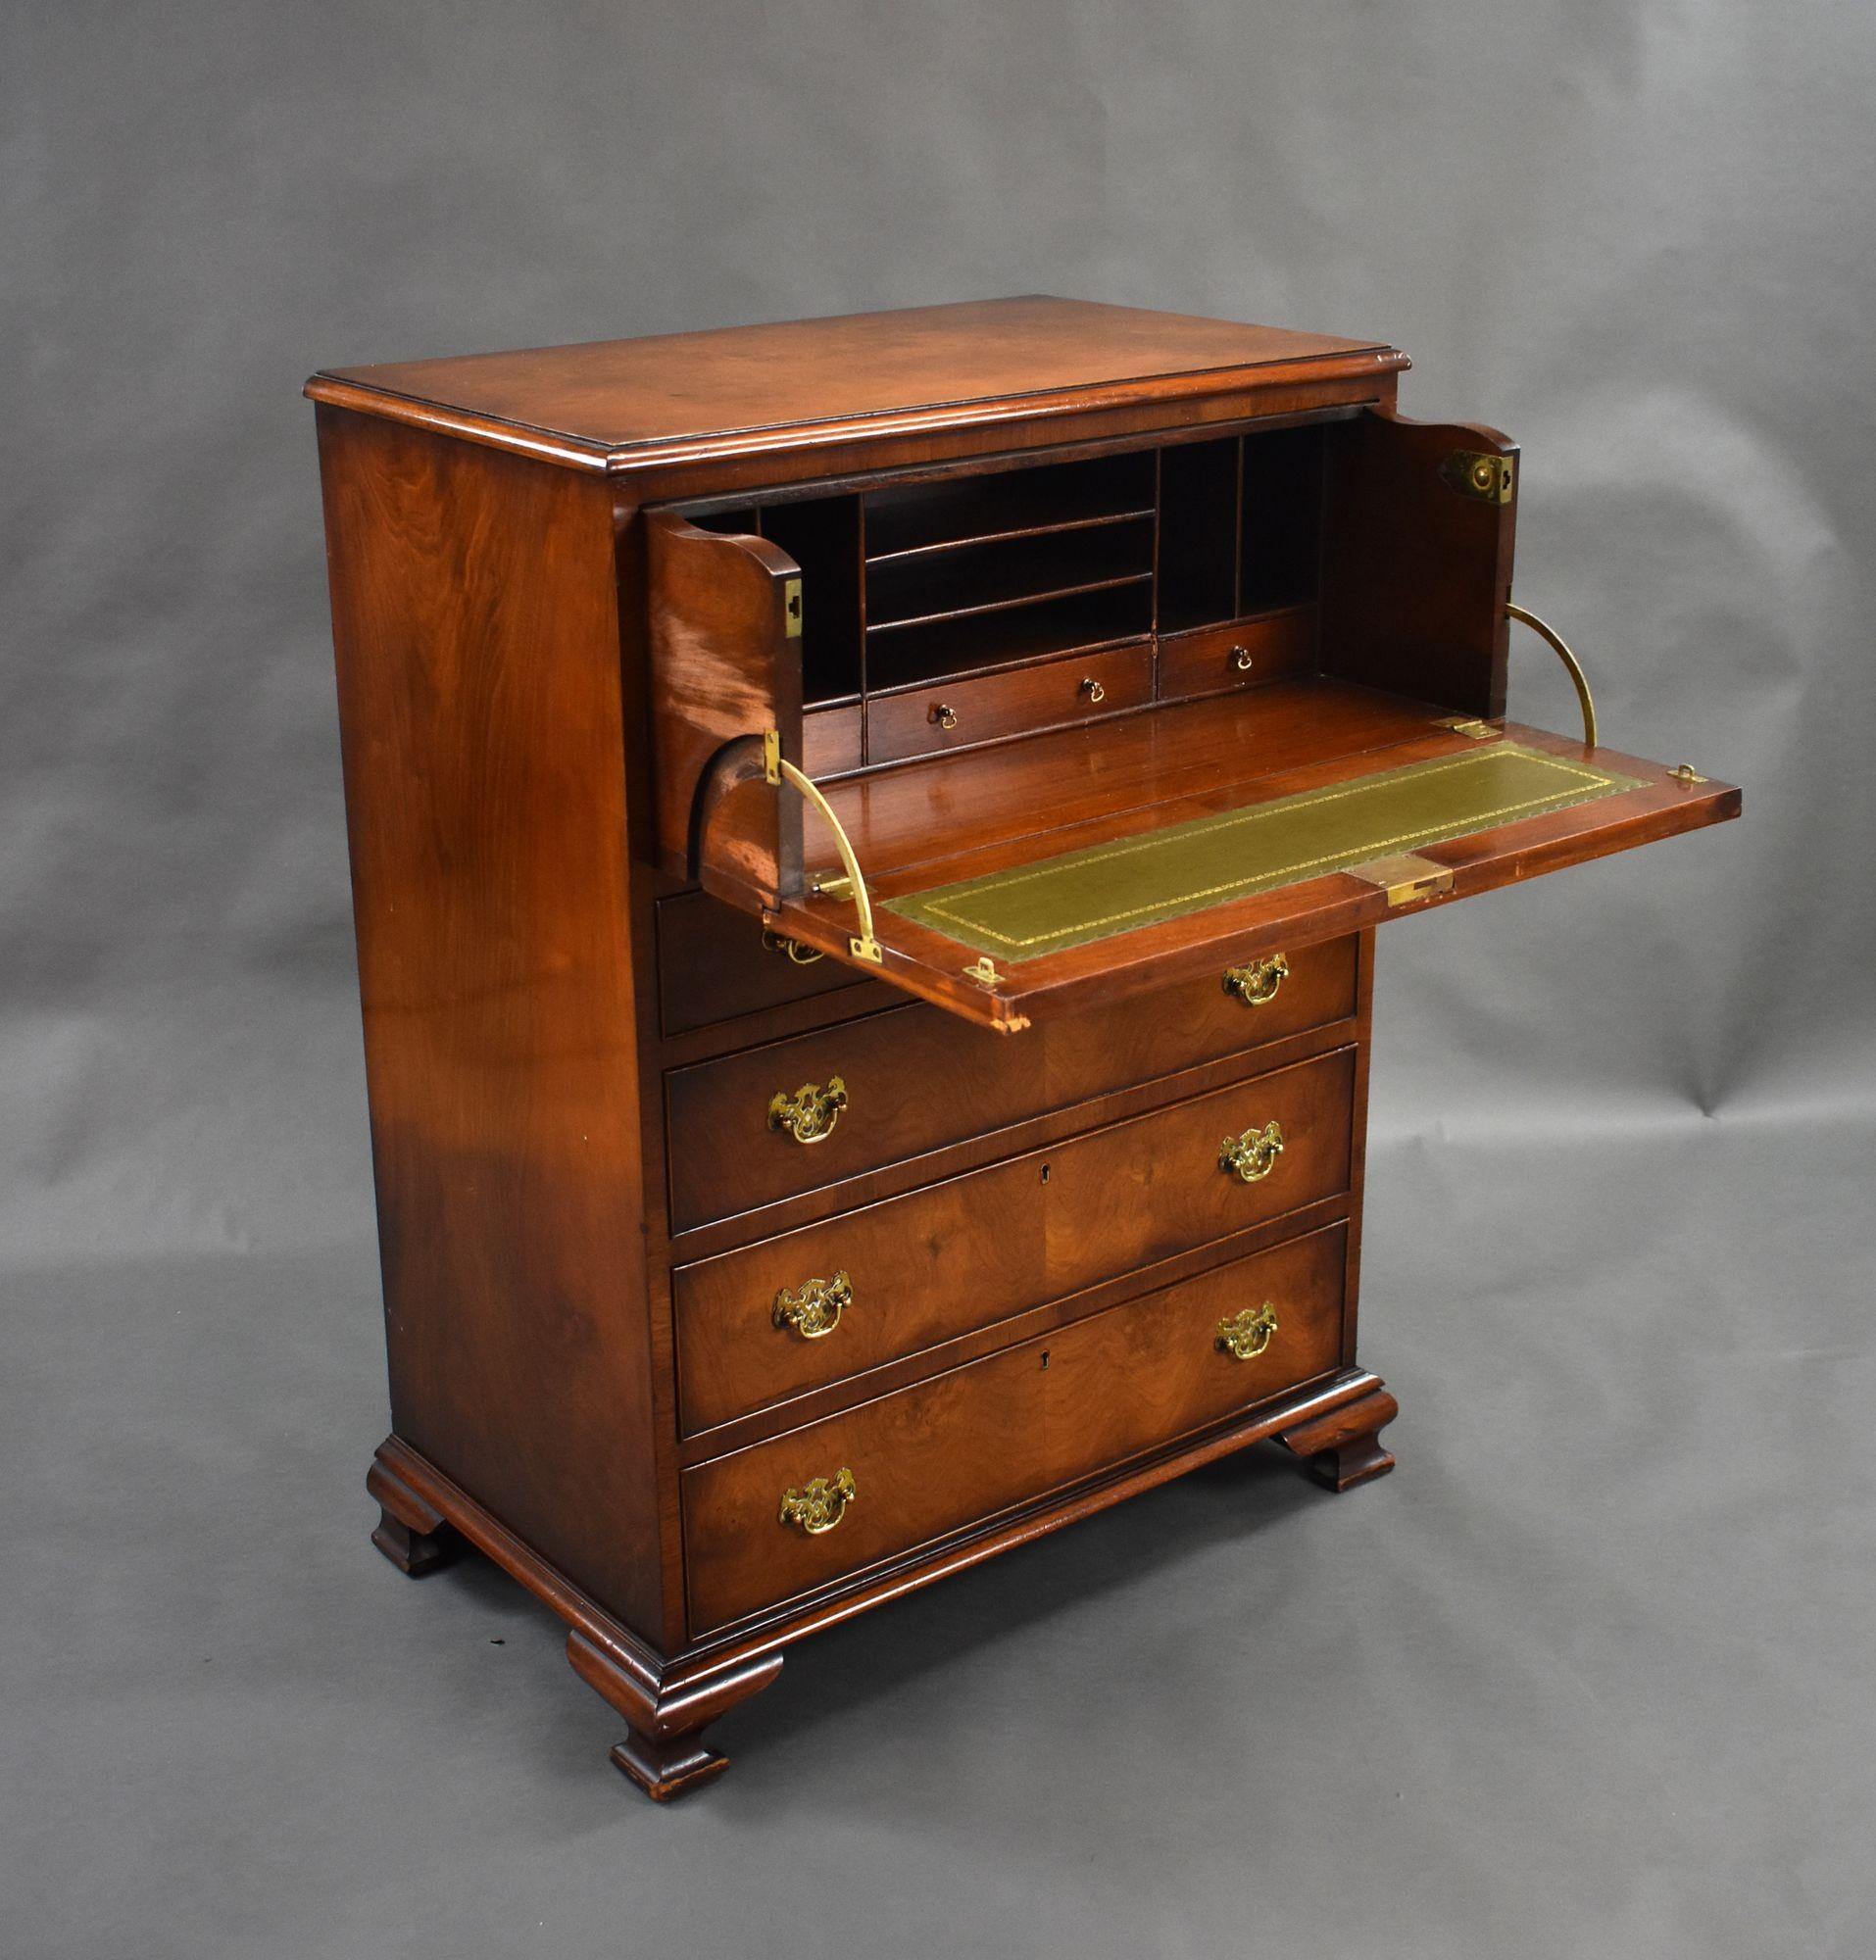 For sale is a good quality antique figured walnut secretaire chest of drawers, having a secretaire drawer to the top, opening to reveal a fitted interior and leather writing surface, above four graduated drawers, each with brass handles. The chest